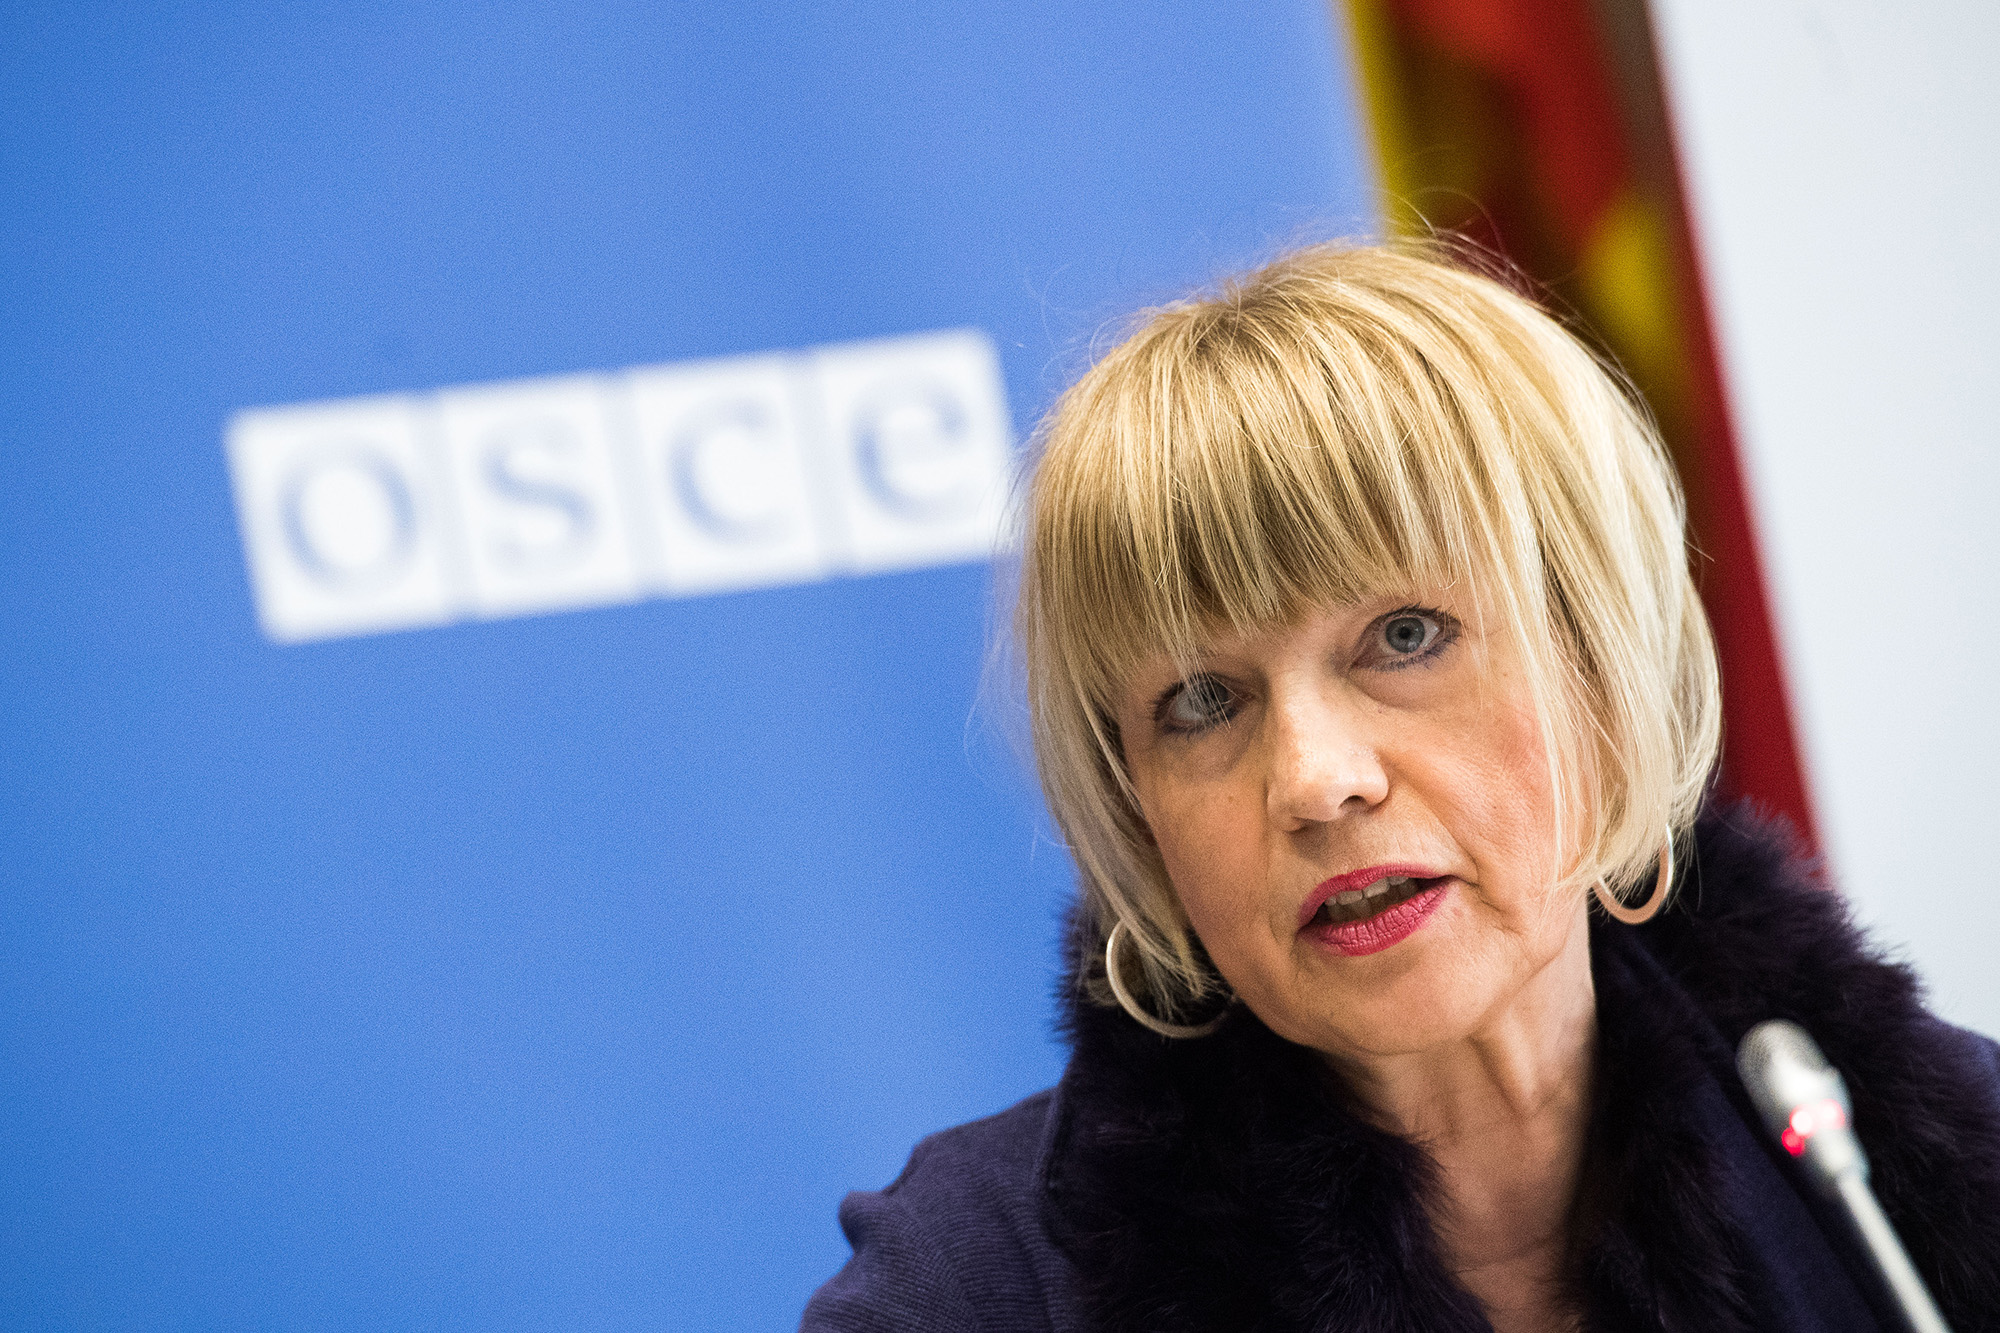 OSCE Secretary General Helga Maria Schmid attends a media conference after meeting of the Permanent Council of the Organization for Security and Cooperation in Europe (OSCE) on January 13, in Vienna, Austria. 